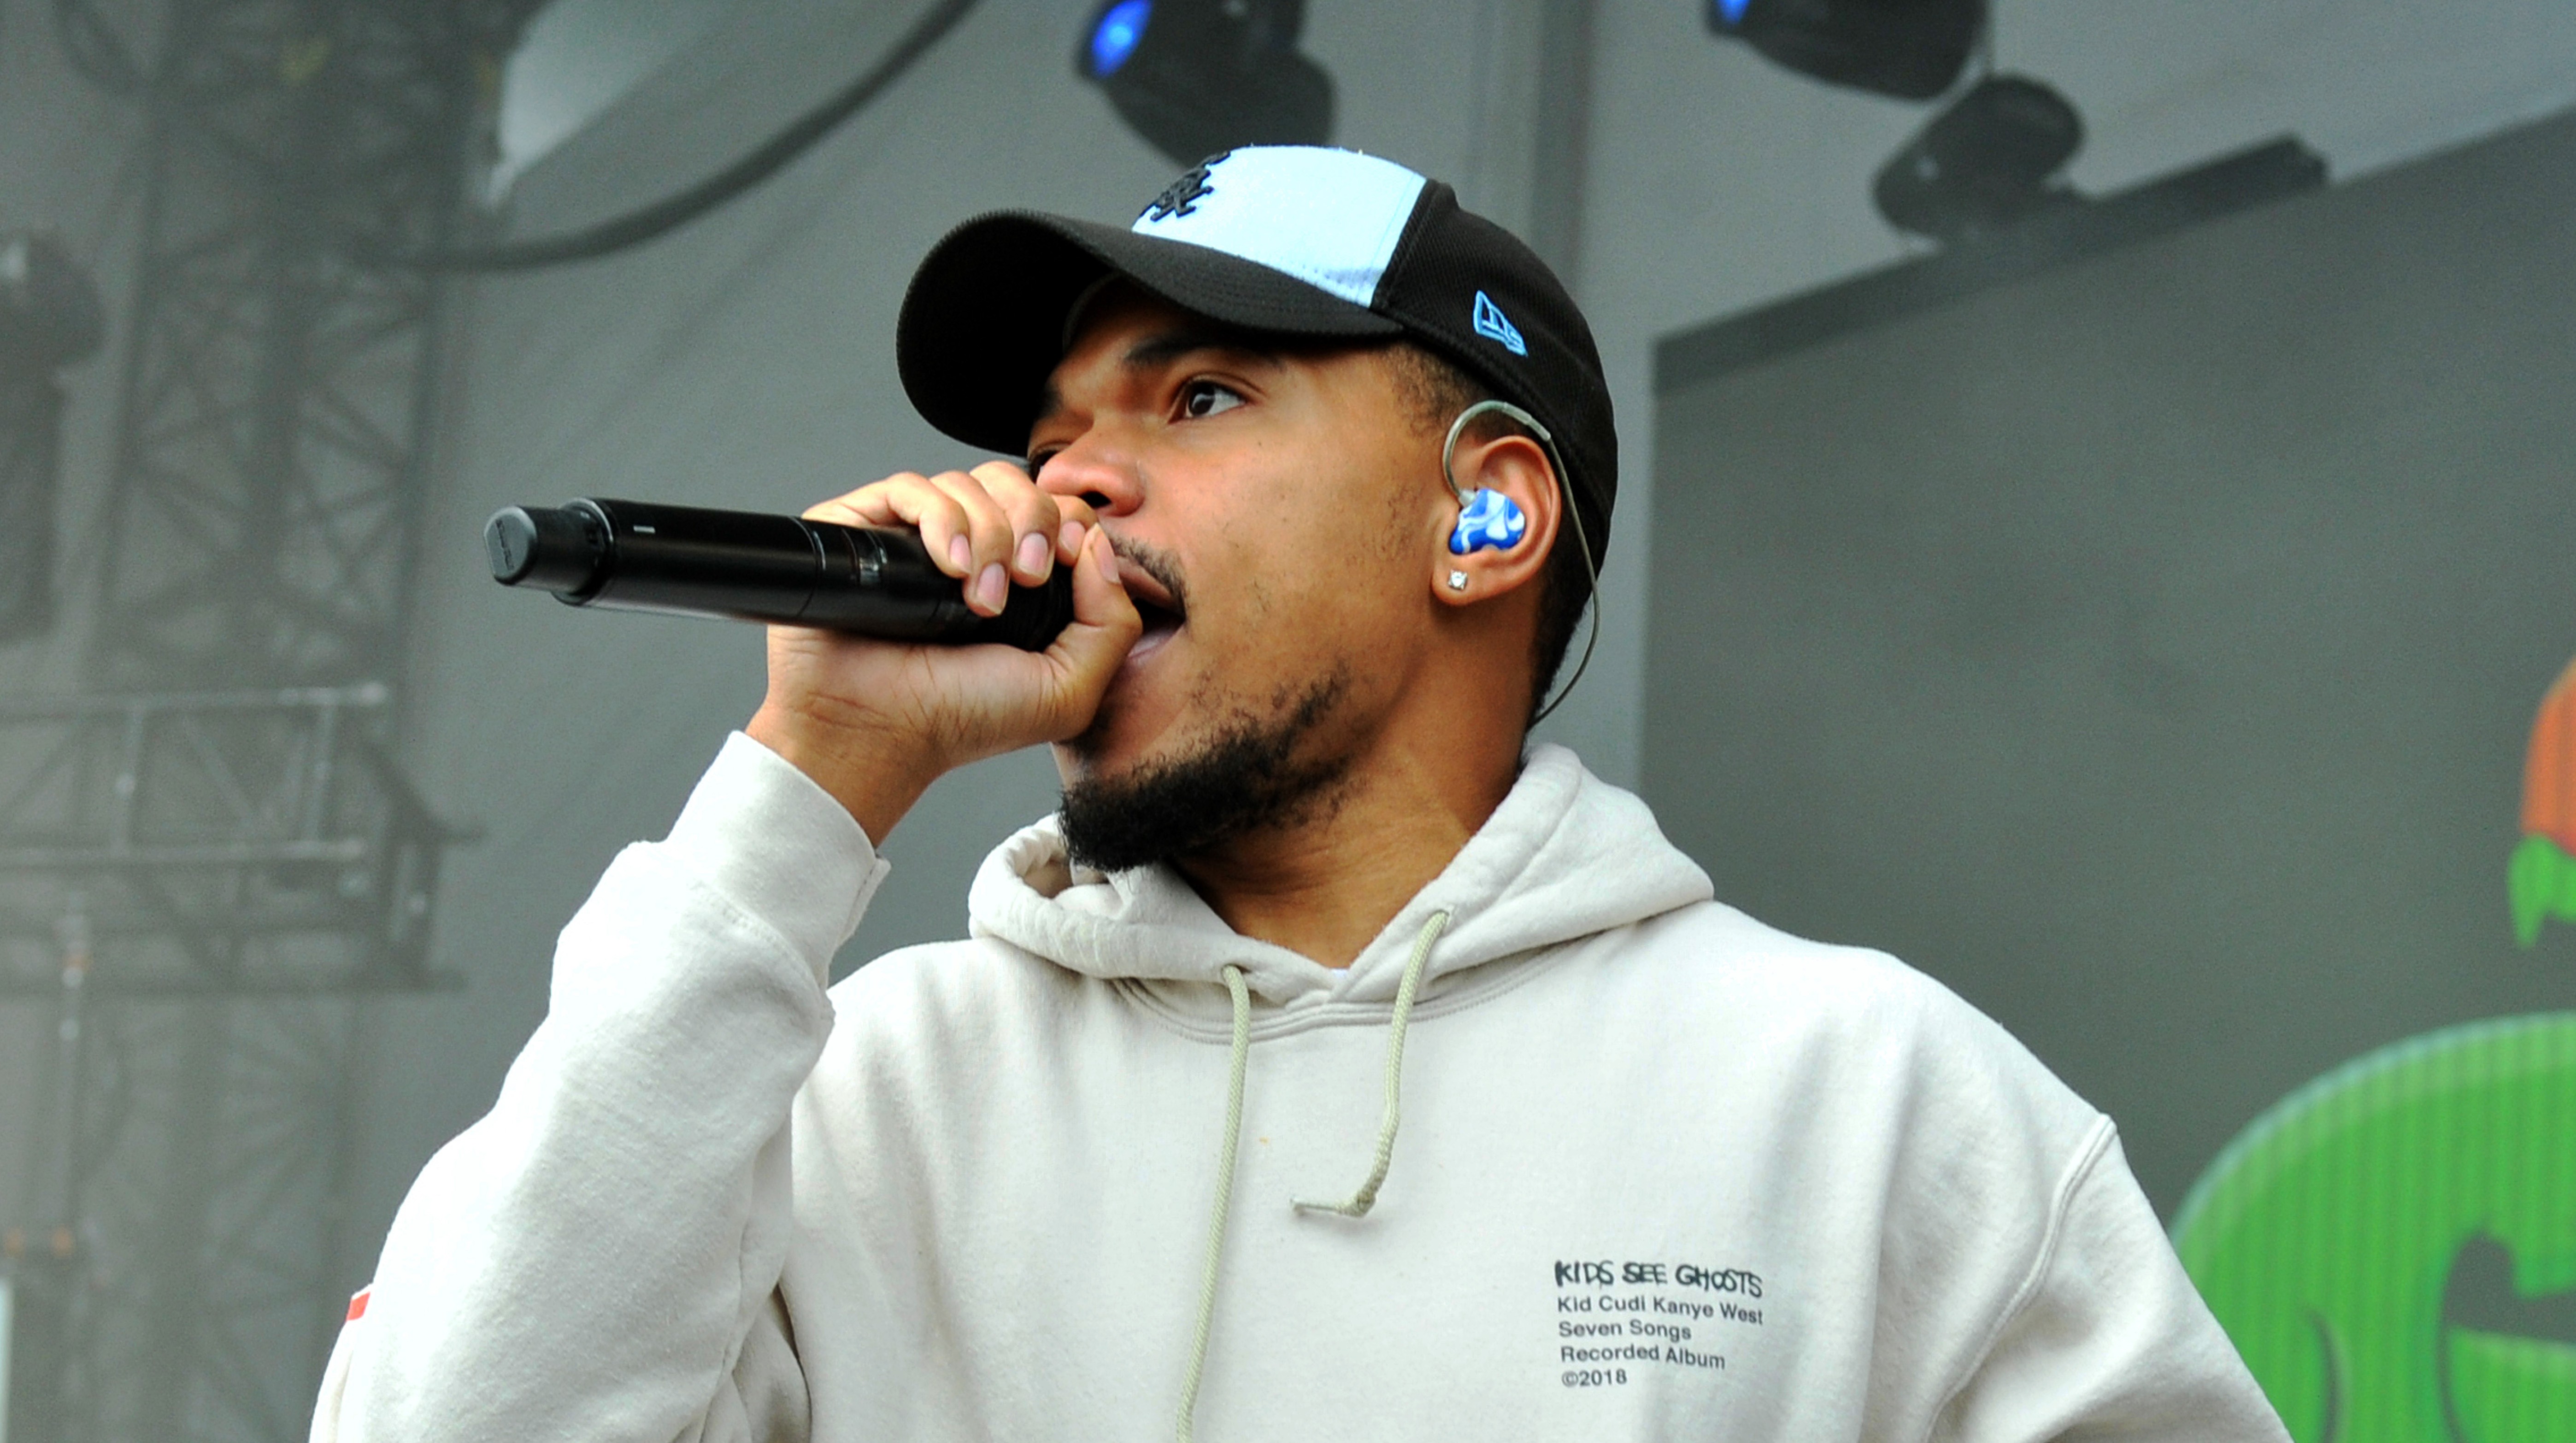 Download Chance the Rapper Teases New Music in Twitter Video ...